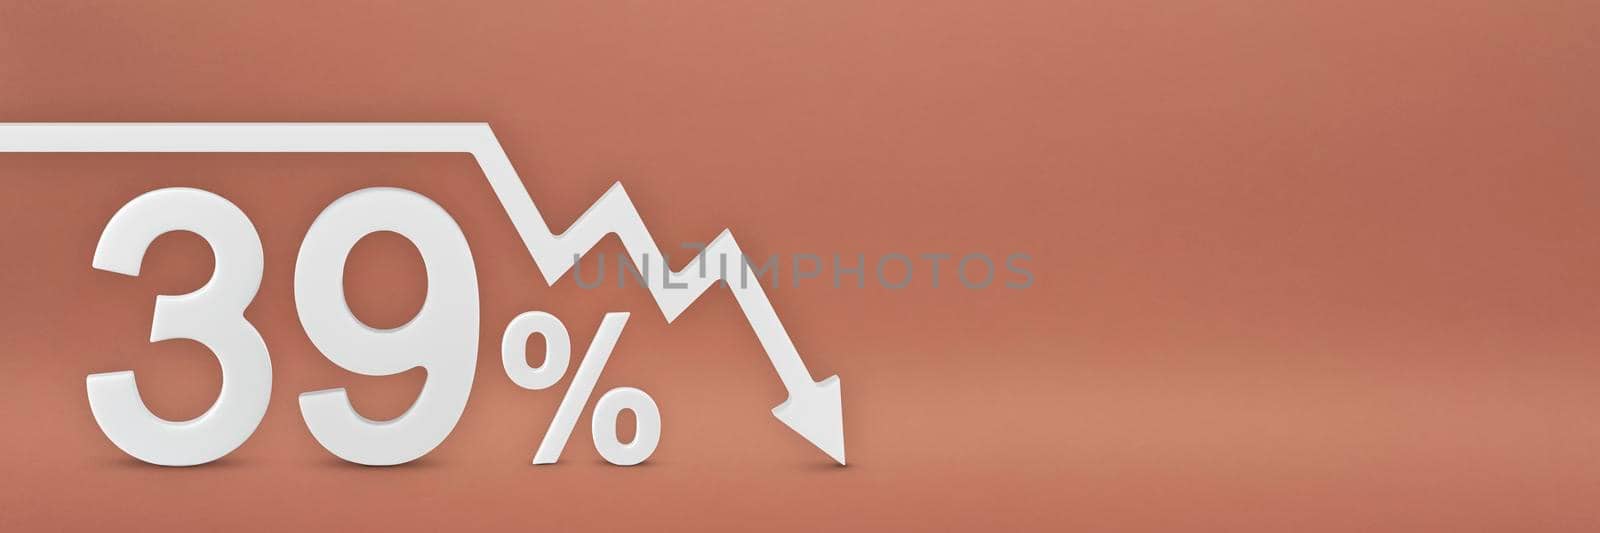 thirty-nine percent, the arrow on the graph is pointing down. Stock market crash, bear market, inflation.Economic collapse, collapse of stocks.3d banner,39 percent discount sign on a red background